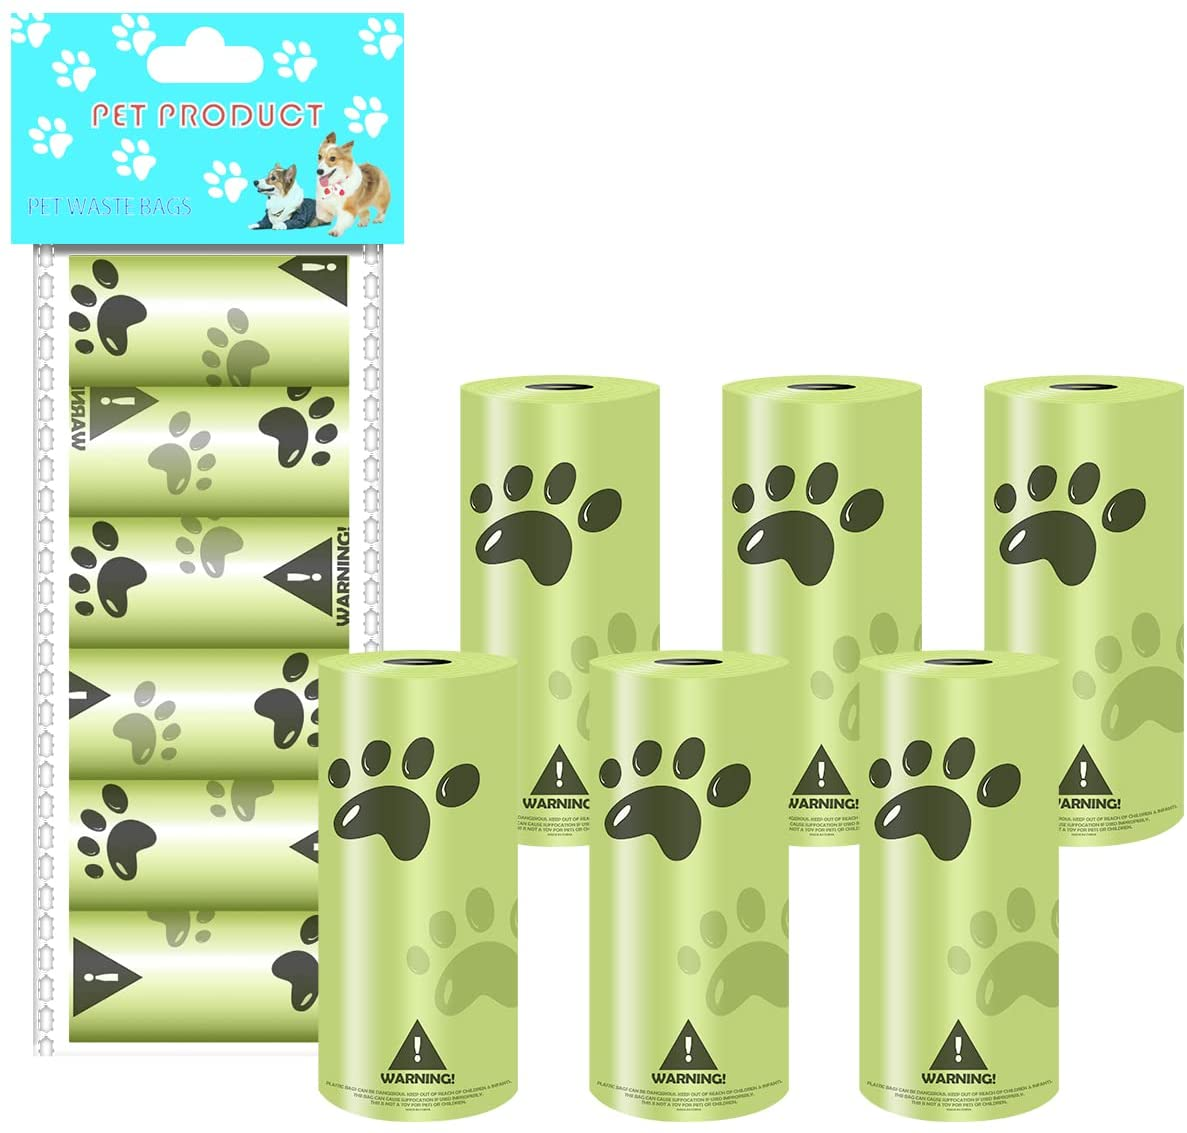 Biodegradable Dog Poop Bags Refill Rolls, Green Compostable Dog Waste Bags